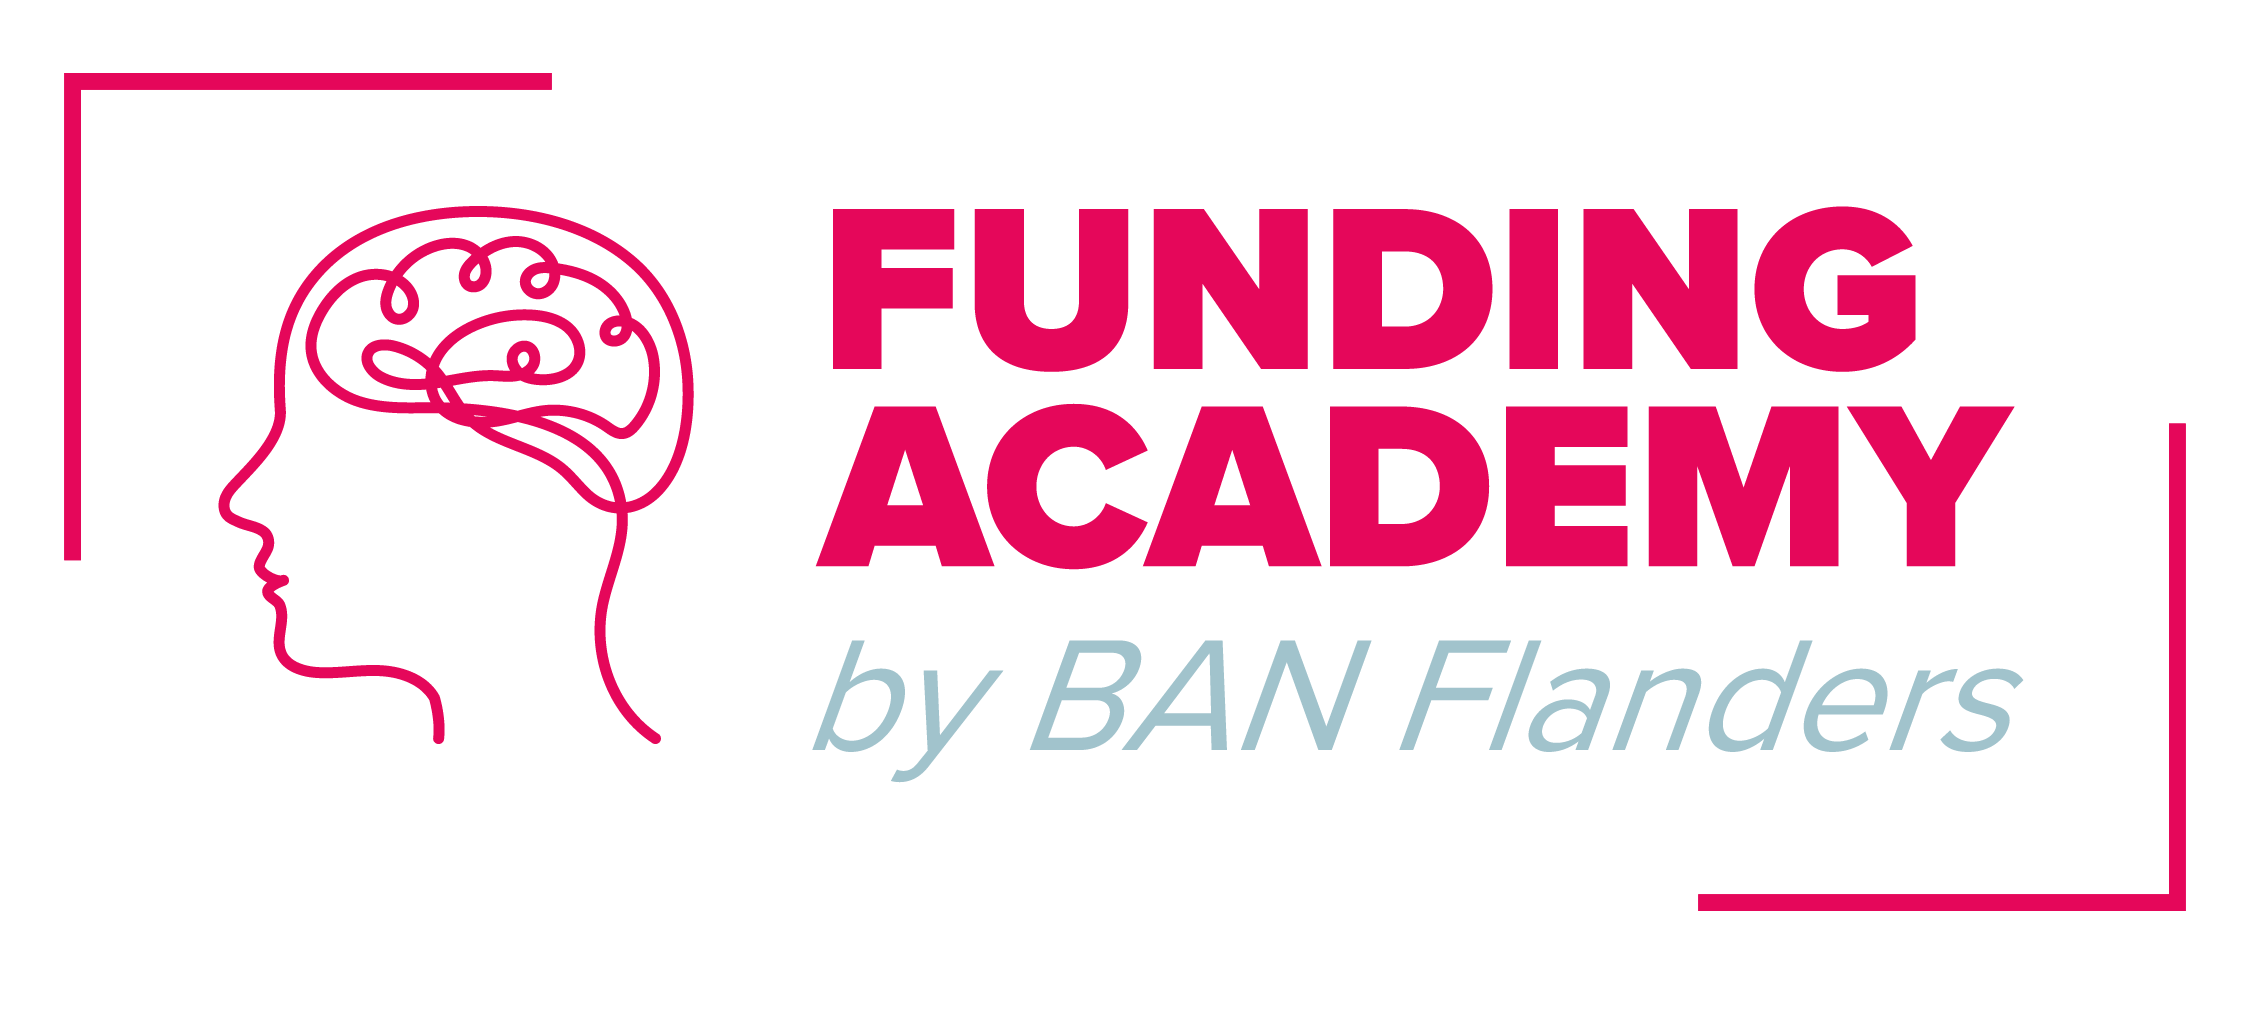 funding.academy by BAN Flanders